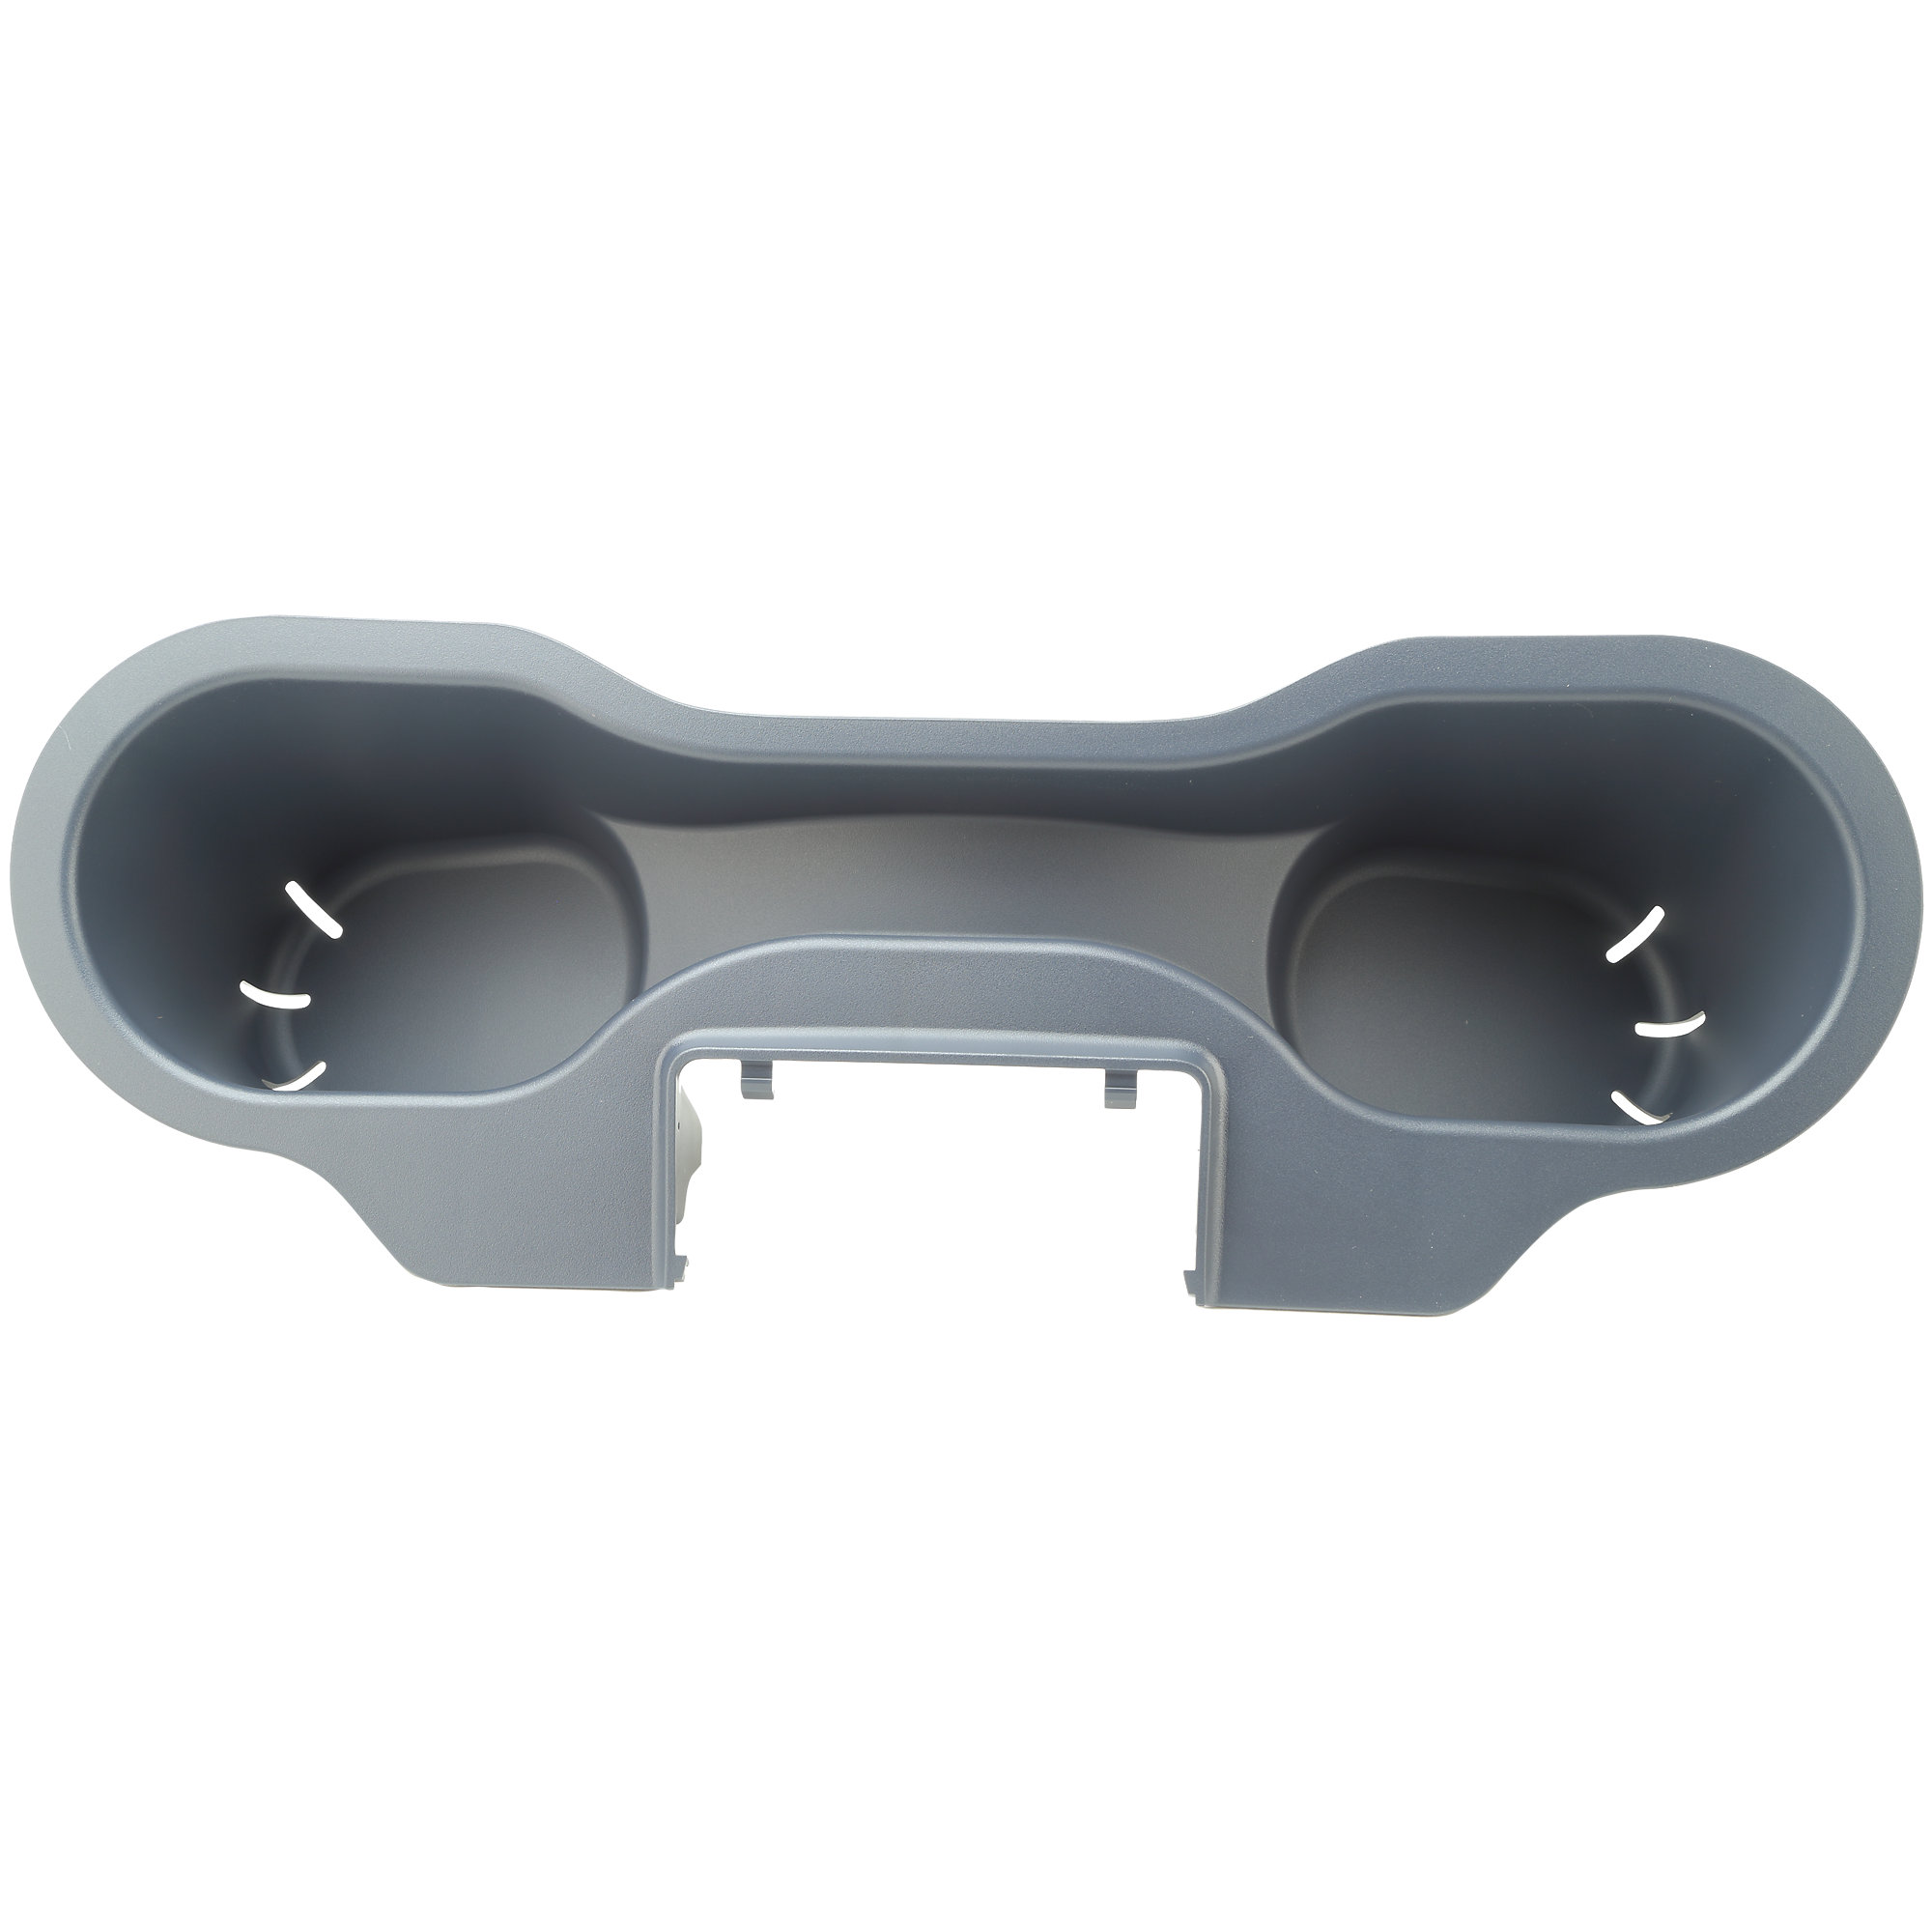 Cup Holder for Recumbent Bike, Precor